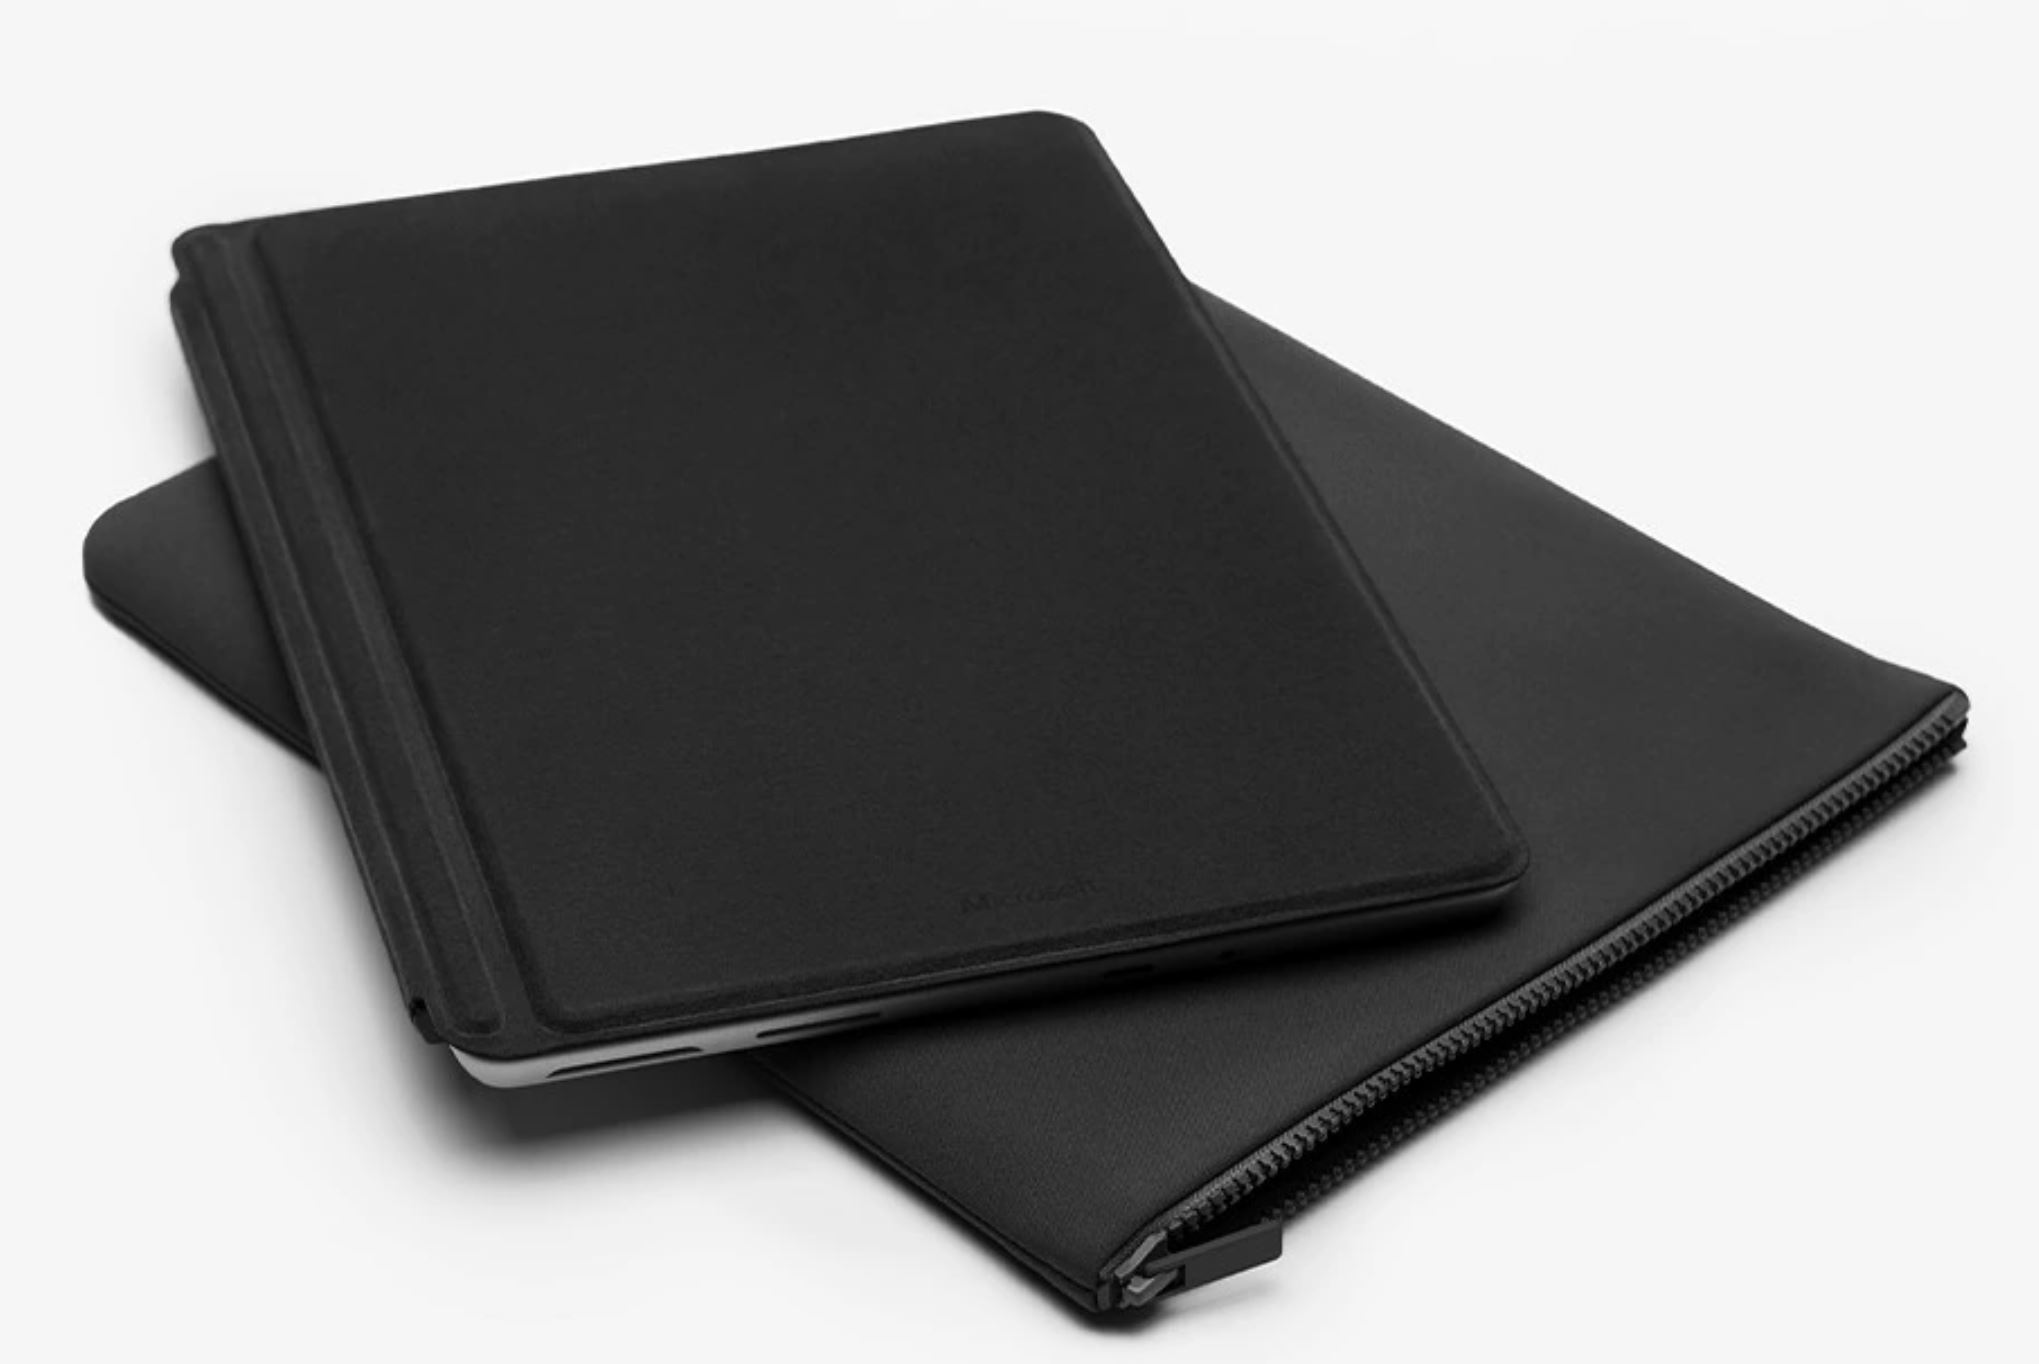 Microsoft now selling an official sleeve for Surface Go devices